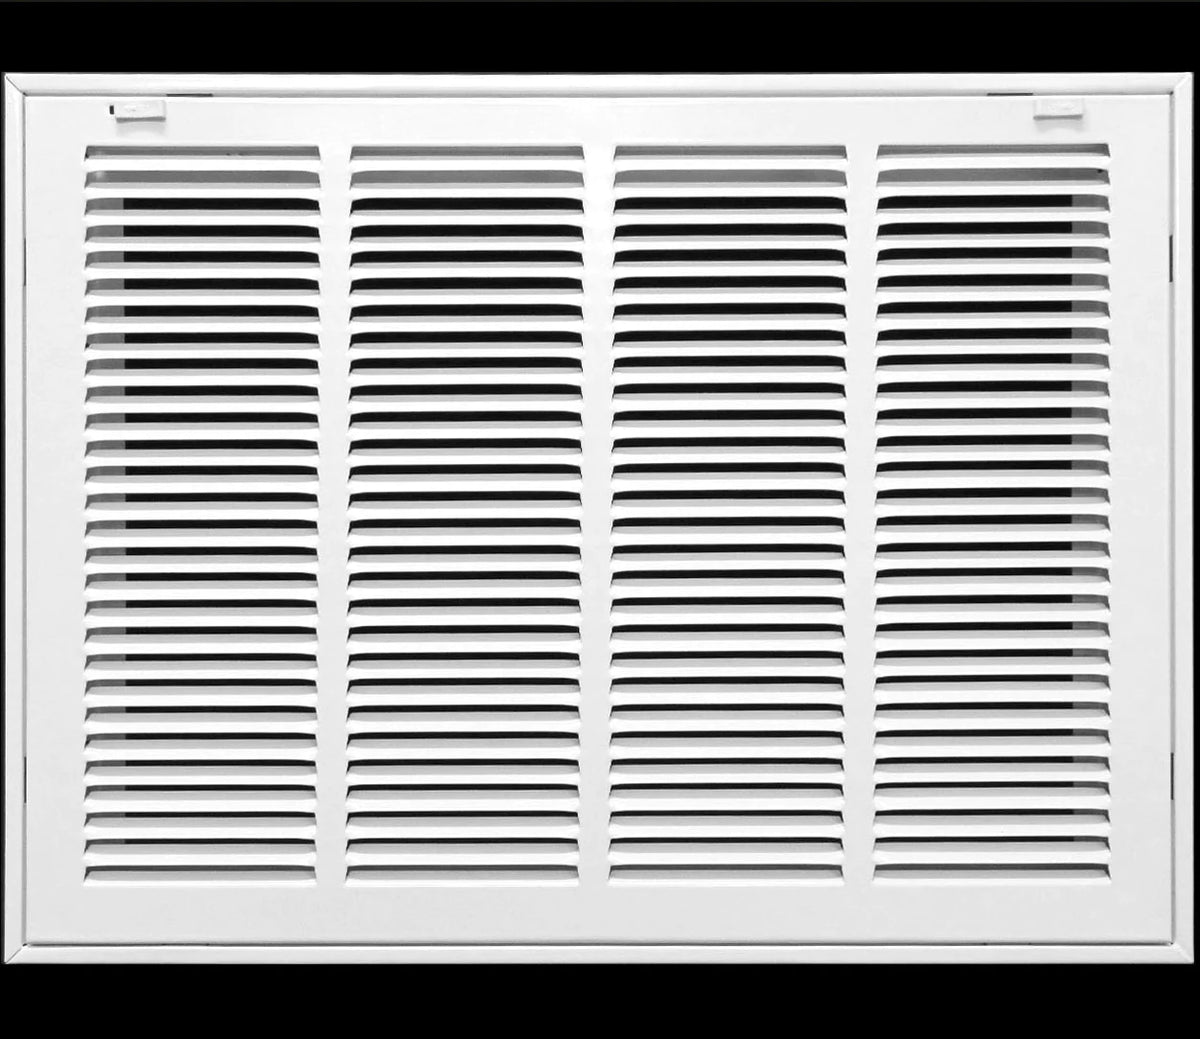 20&quot; X 10&quot; Steel Return Air Filter Grille for 1&quot; Filter - Removable Frame - [Outer Dimensions: 22 5/8&quot; X 12 5/8&quot;]